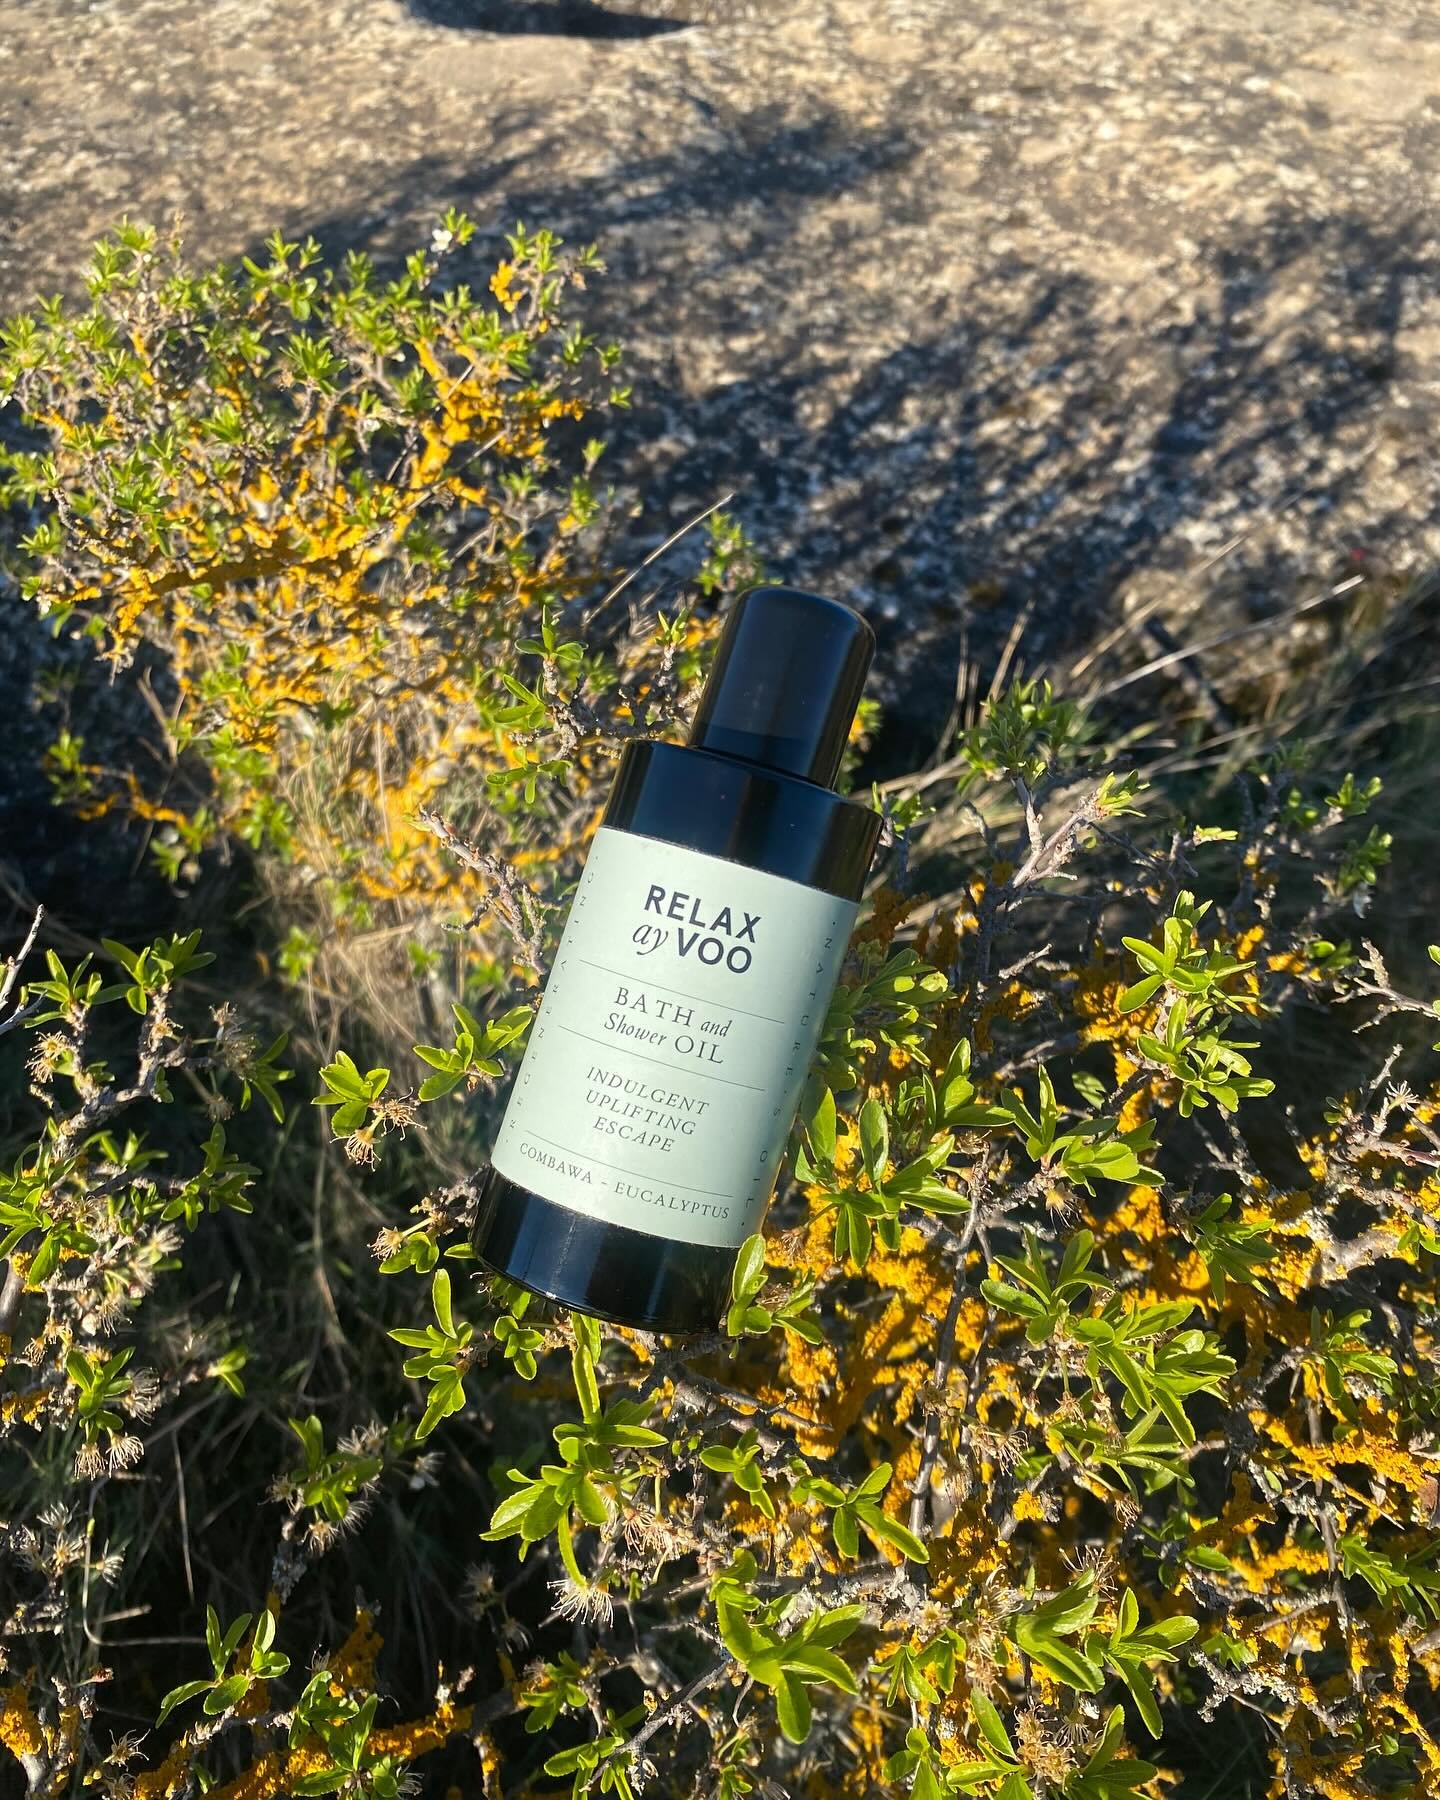 Today is earth day 🌱 One of our favorite days of the year. Our powerful formulation contain everything your skin needs. By producing less waste &amp; creating small batches, we aim to not only have a positive impact on you and your skin but also on 